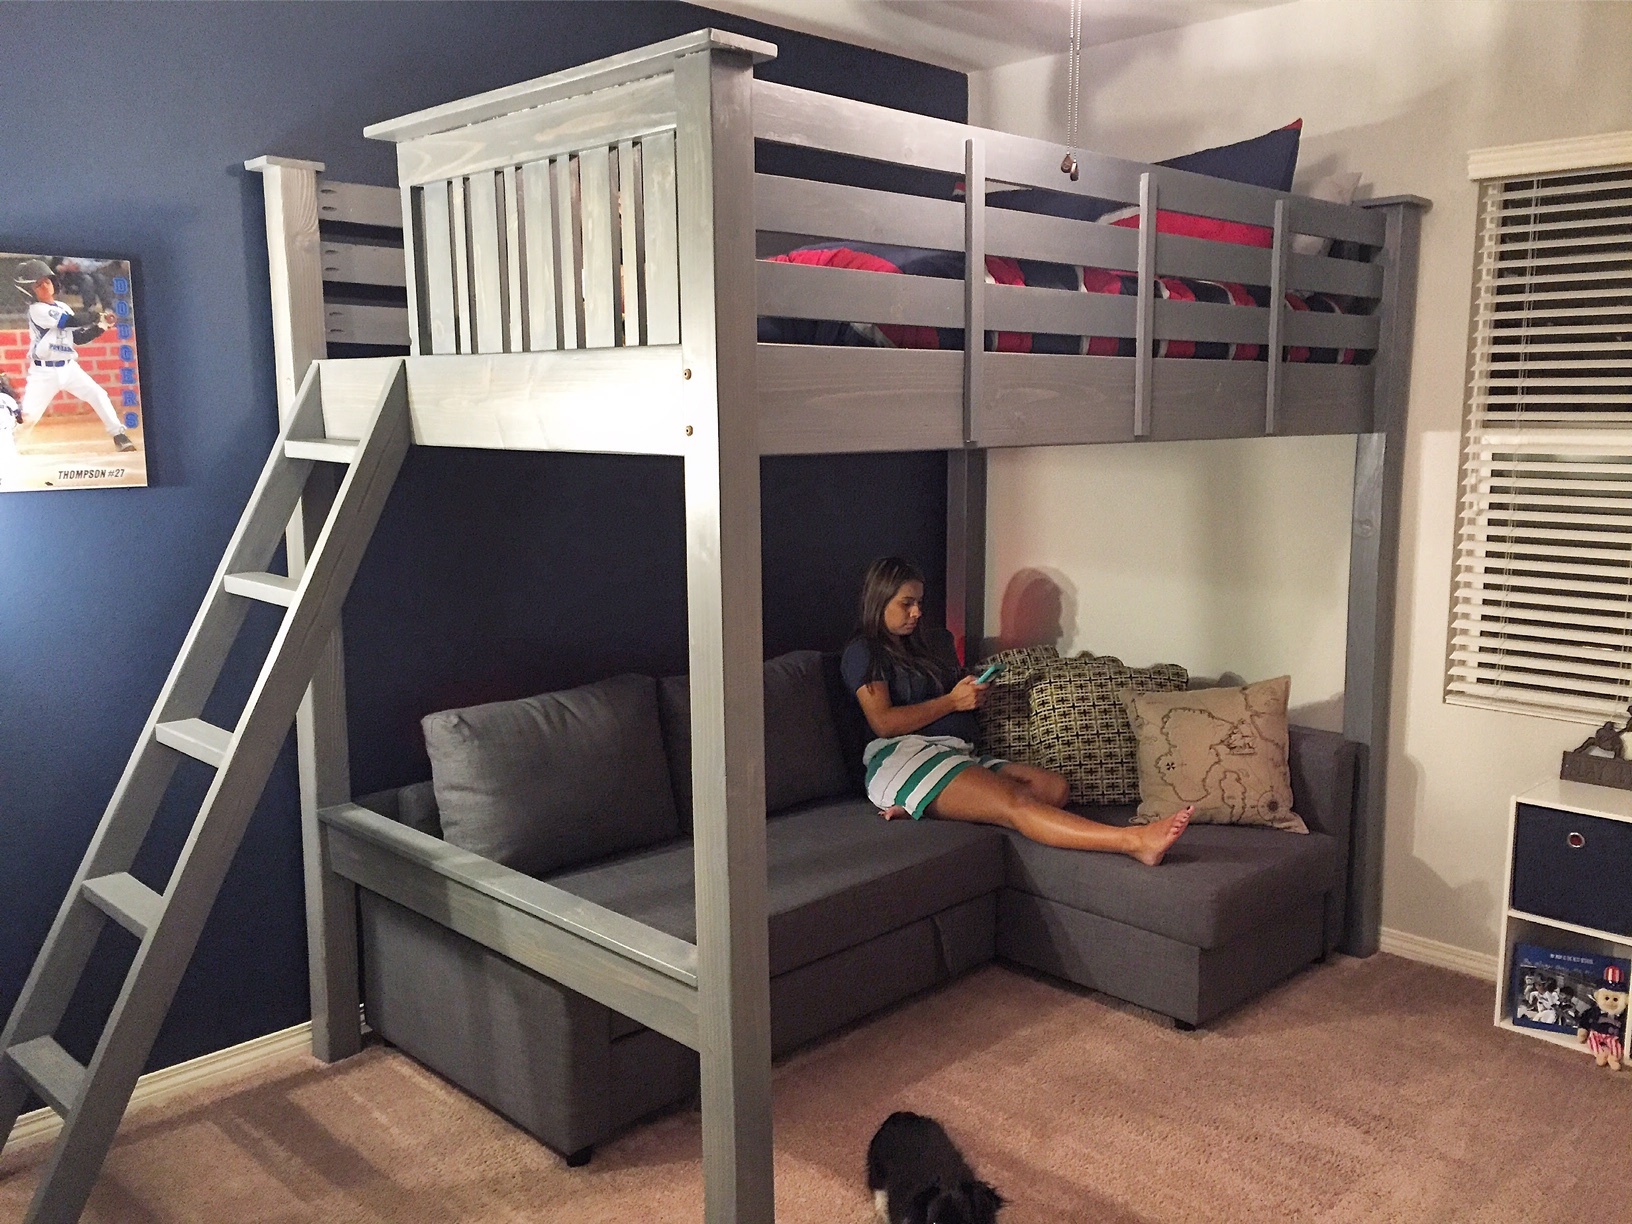 loft bed with sofa underneath